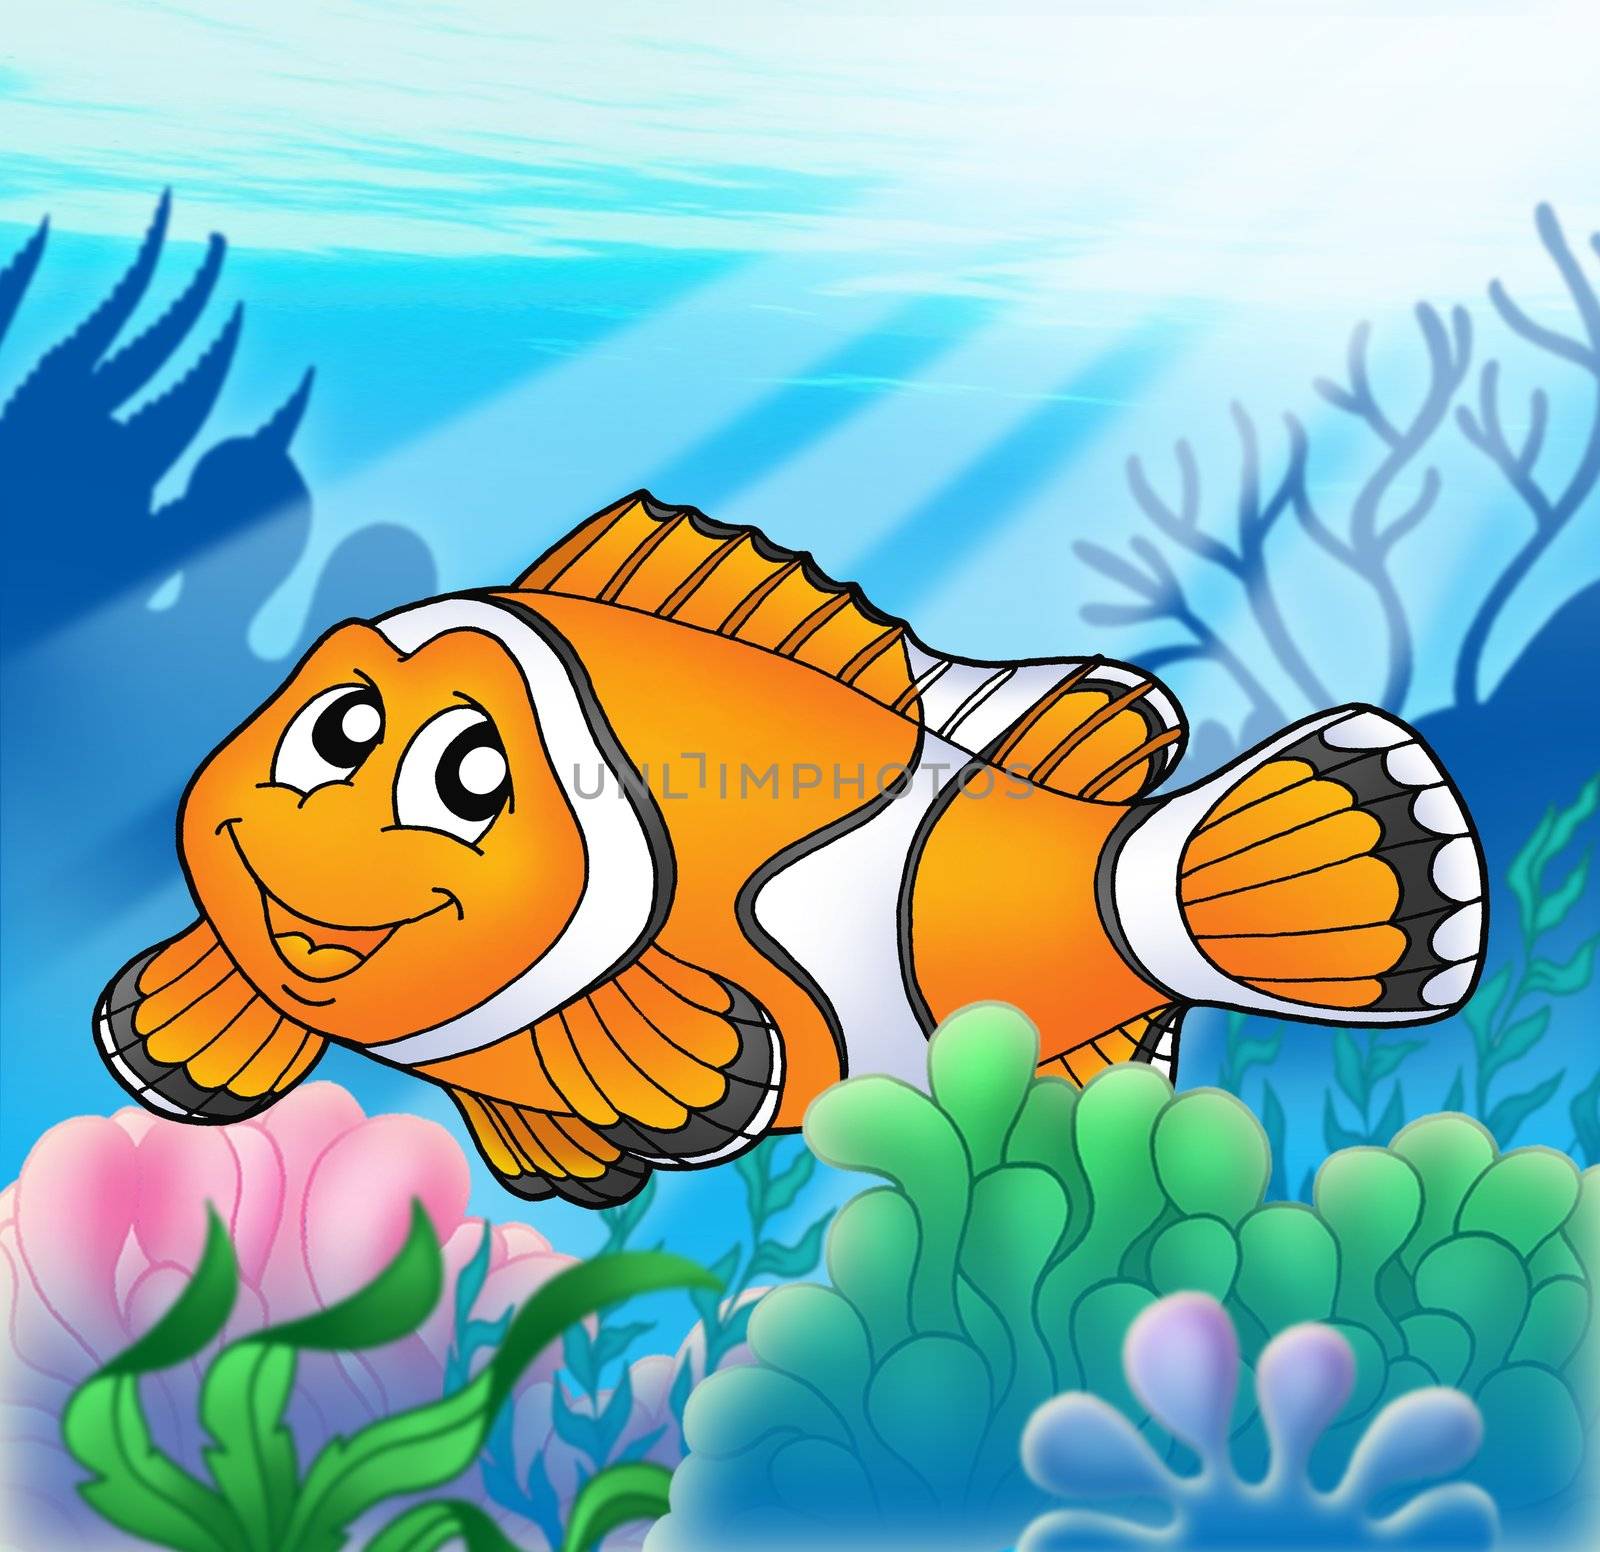 Clownfish with anemone - color illustration.